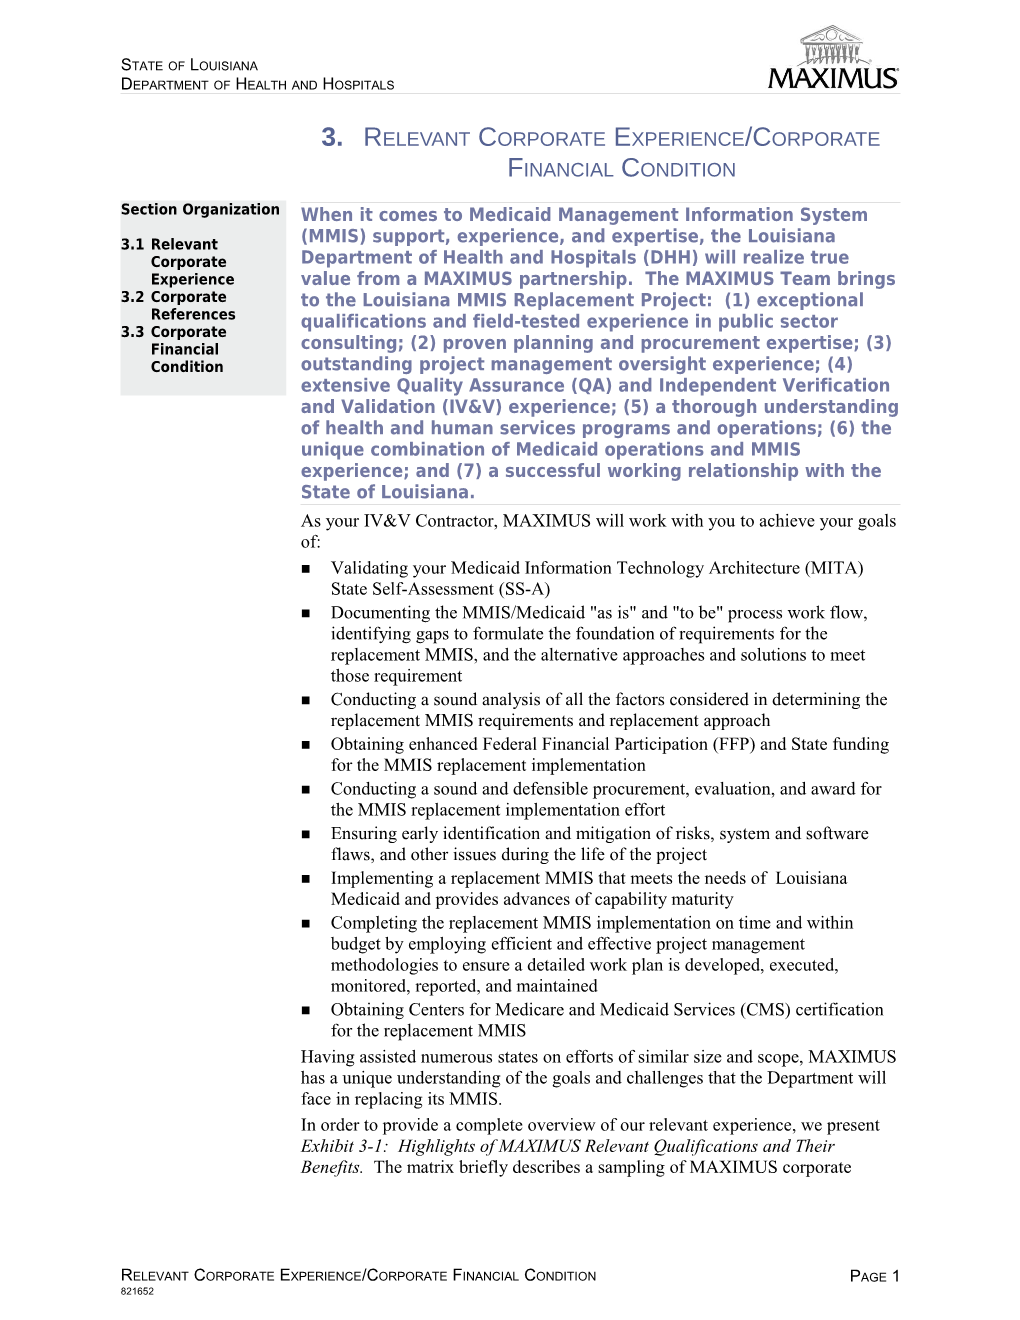 3. Relevant Corporate Experience/Corporate Financial Condition